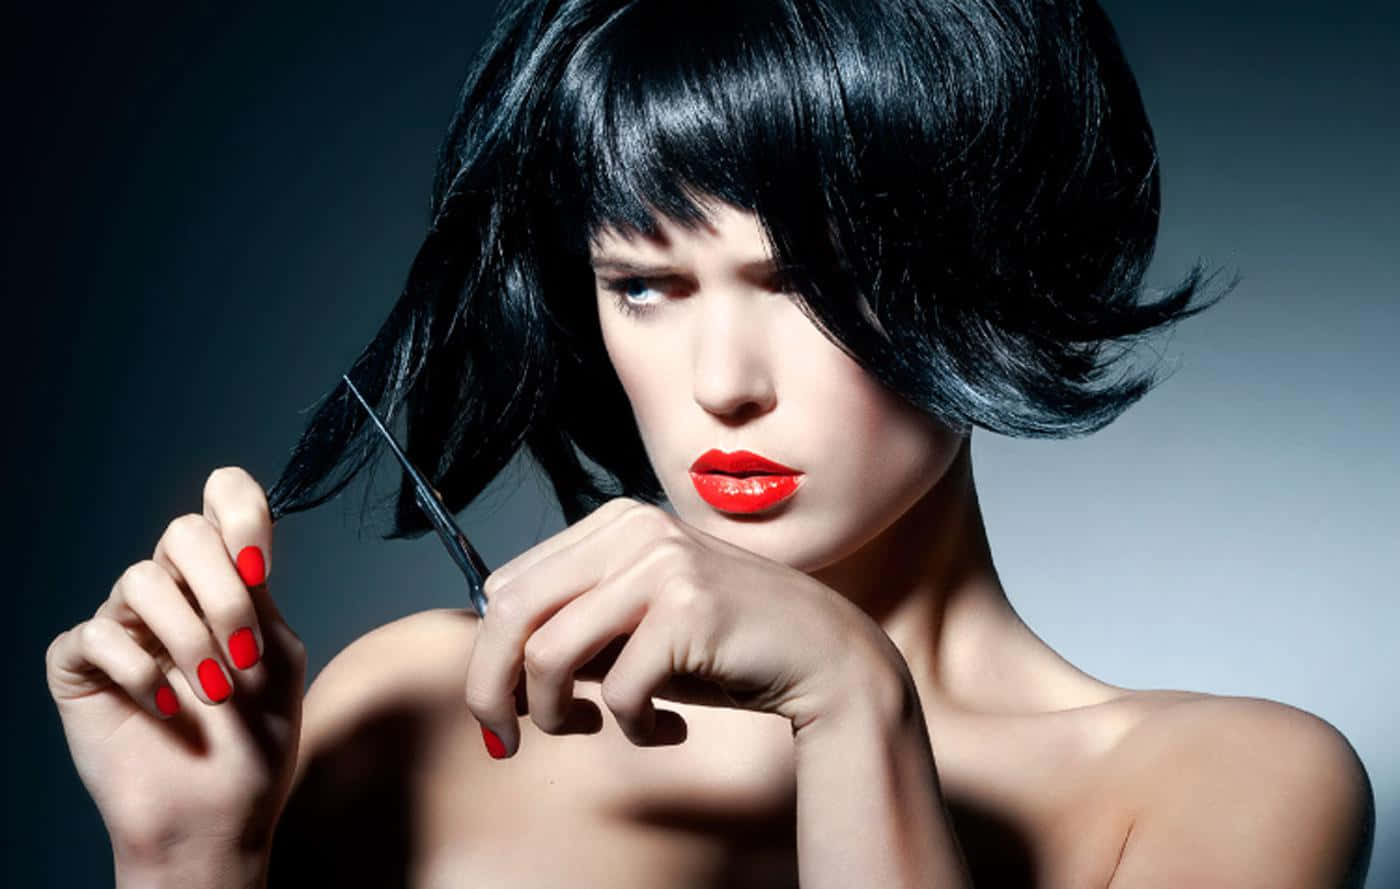 A Woman With Black Hair And Red Nails Holding A Pair Of Scissors